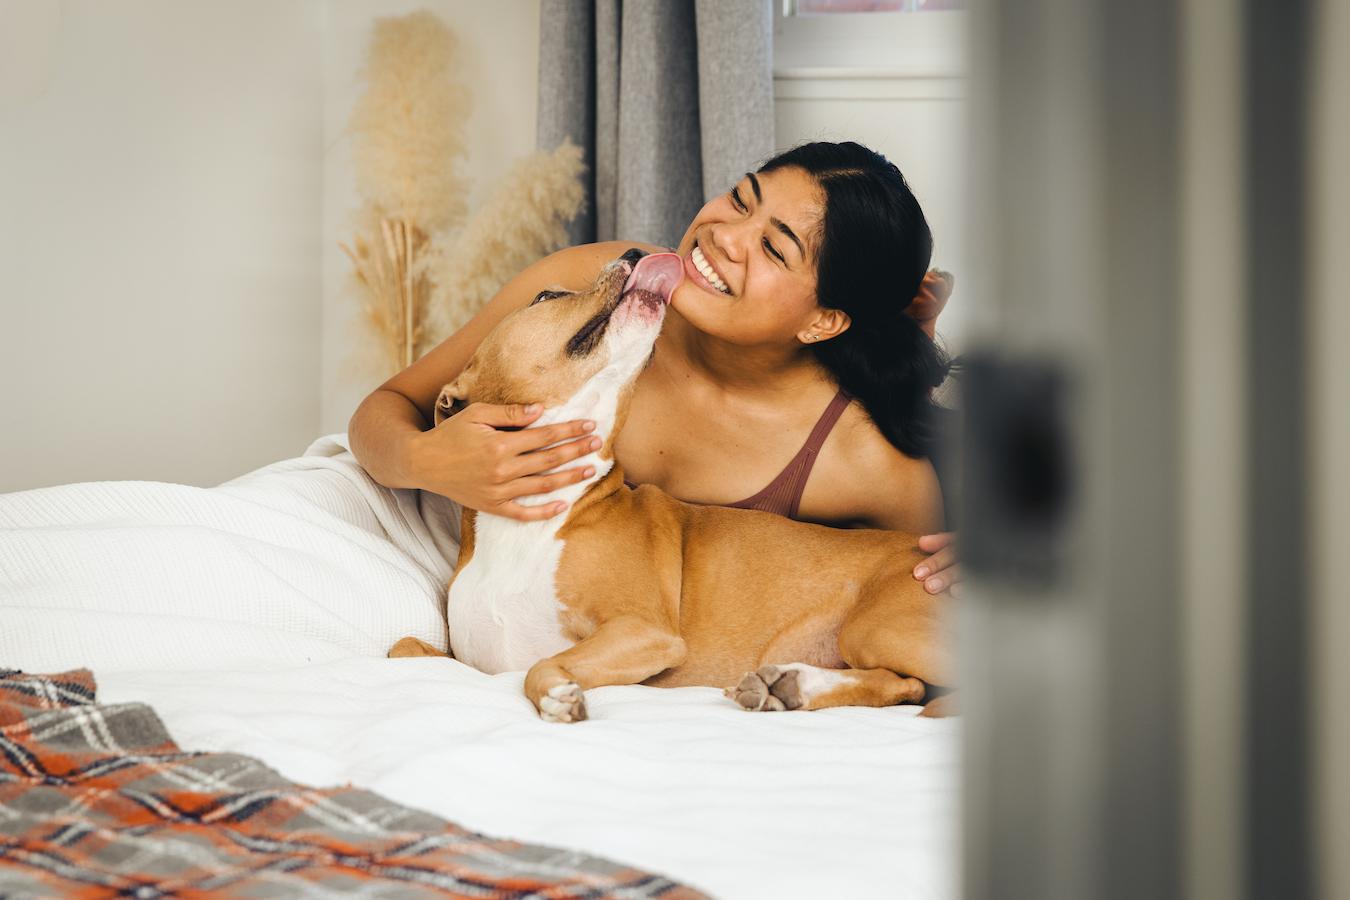 woman in bed with her dog dog dog dog's face dog is licking hot spots grooming dogs to lick your face body language problem licking